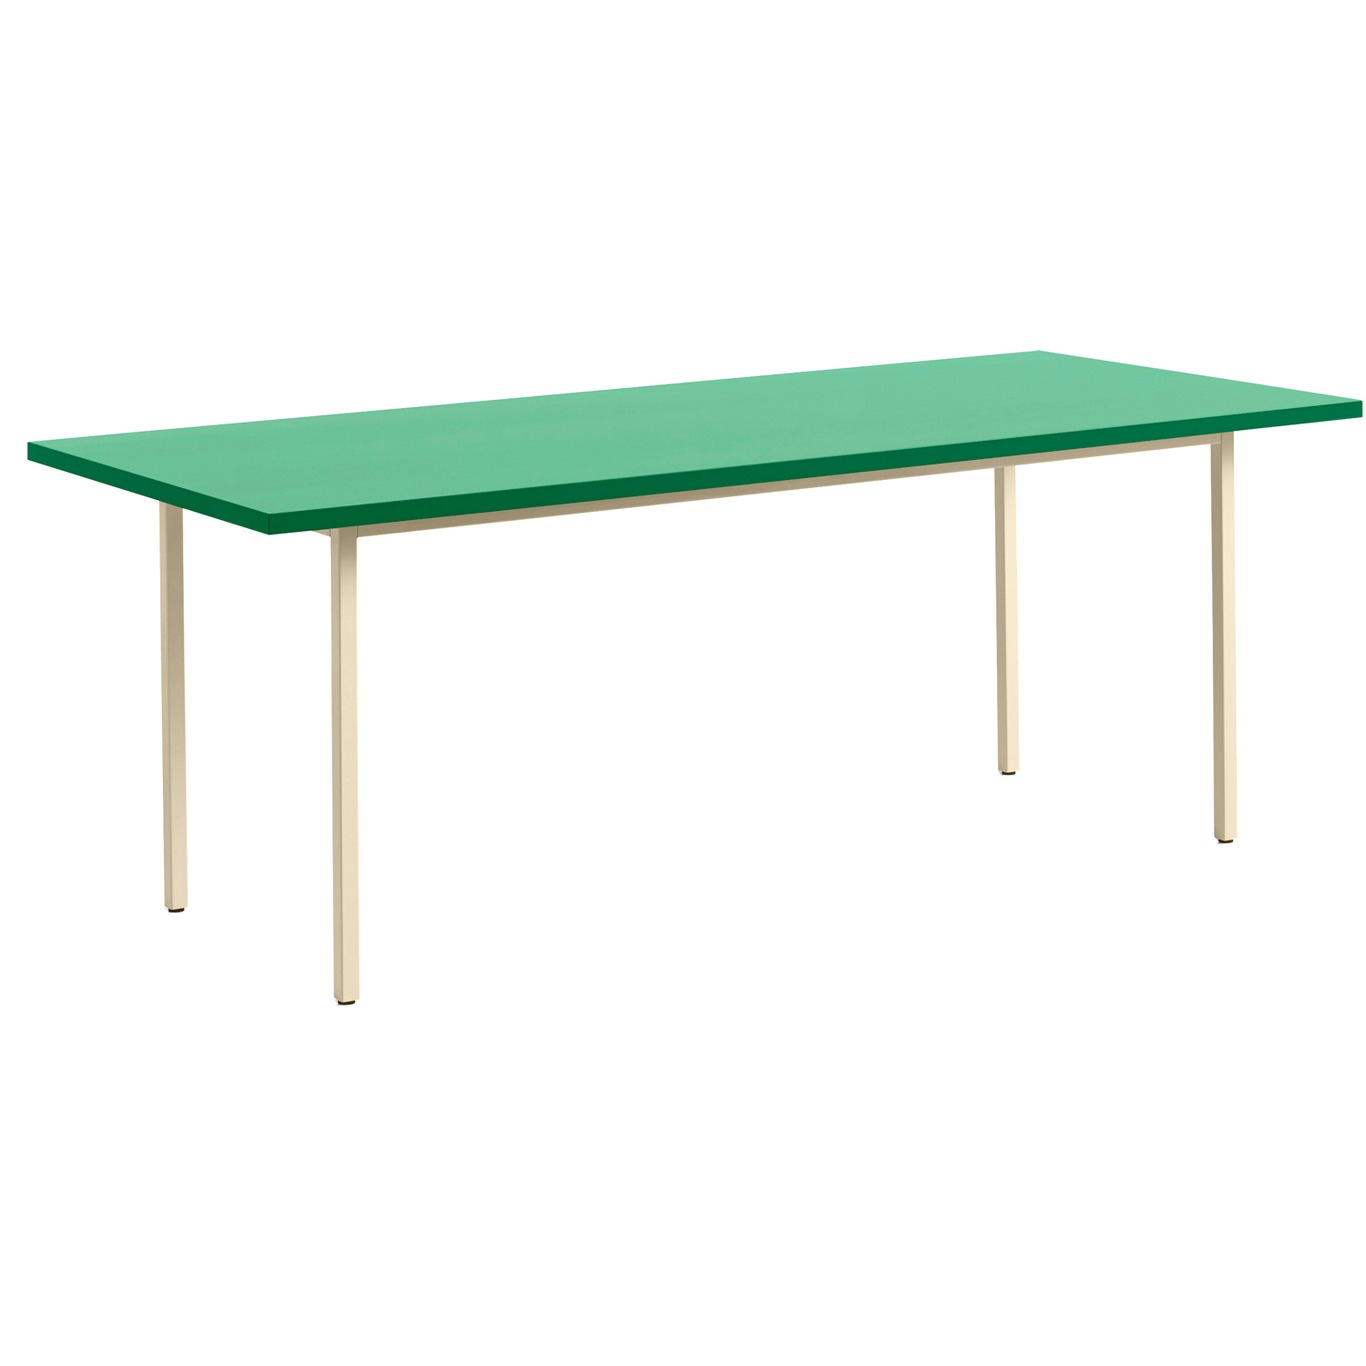 Two-Colour Bord 200x90 cm, Ivory / Green Mint